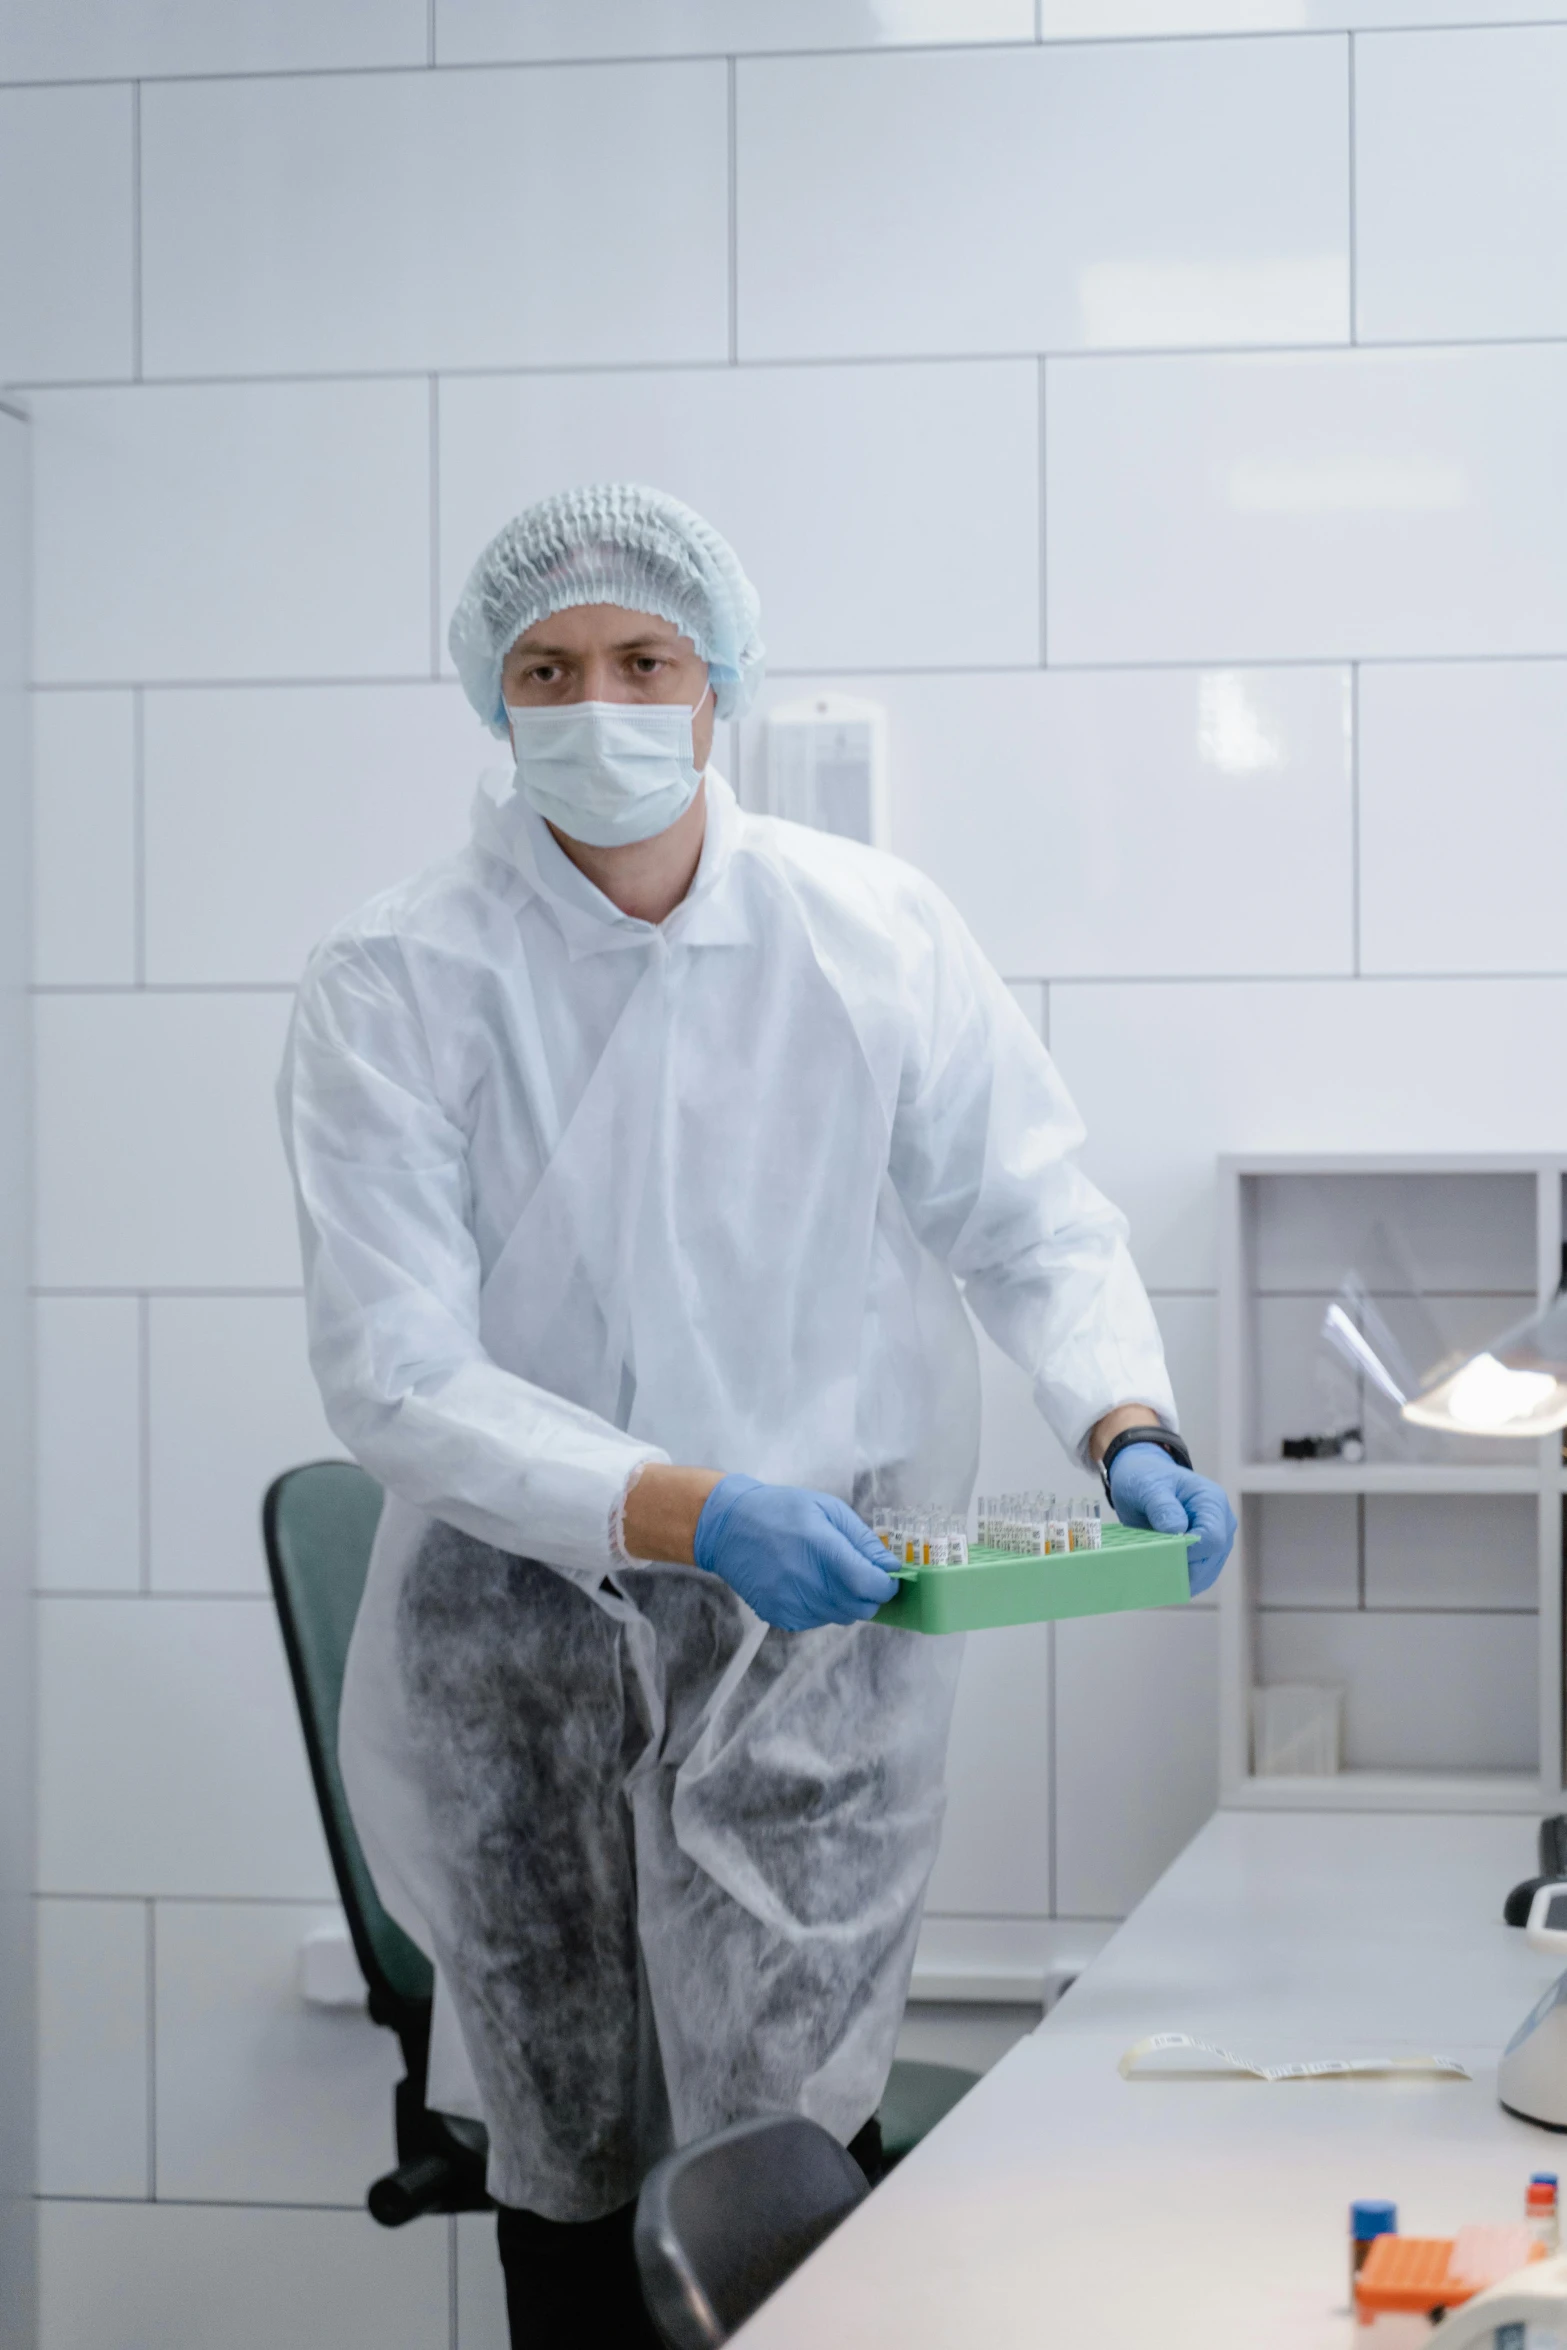 man wearing white lab coat and surgical mask while holding a toothpaste in a room